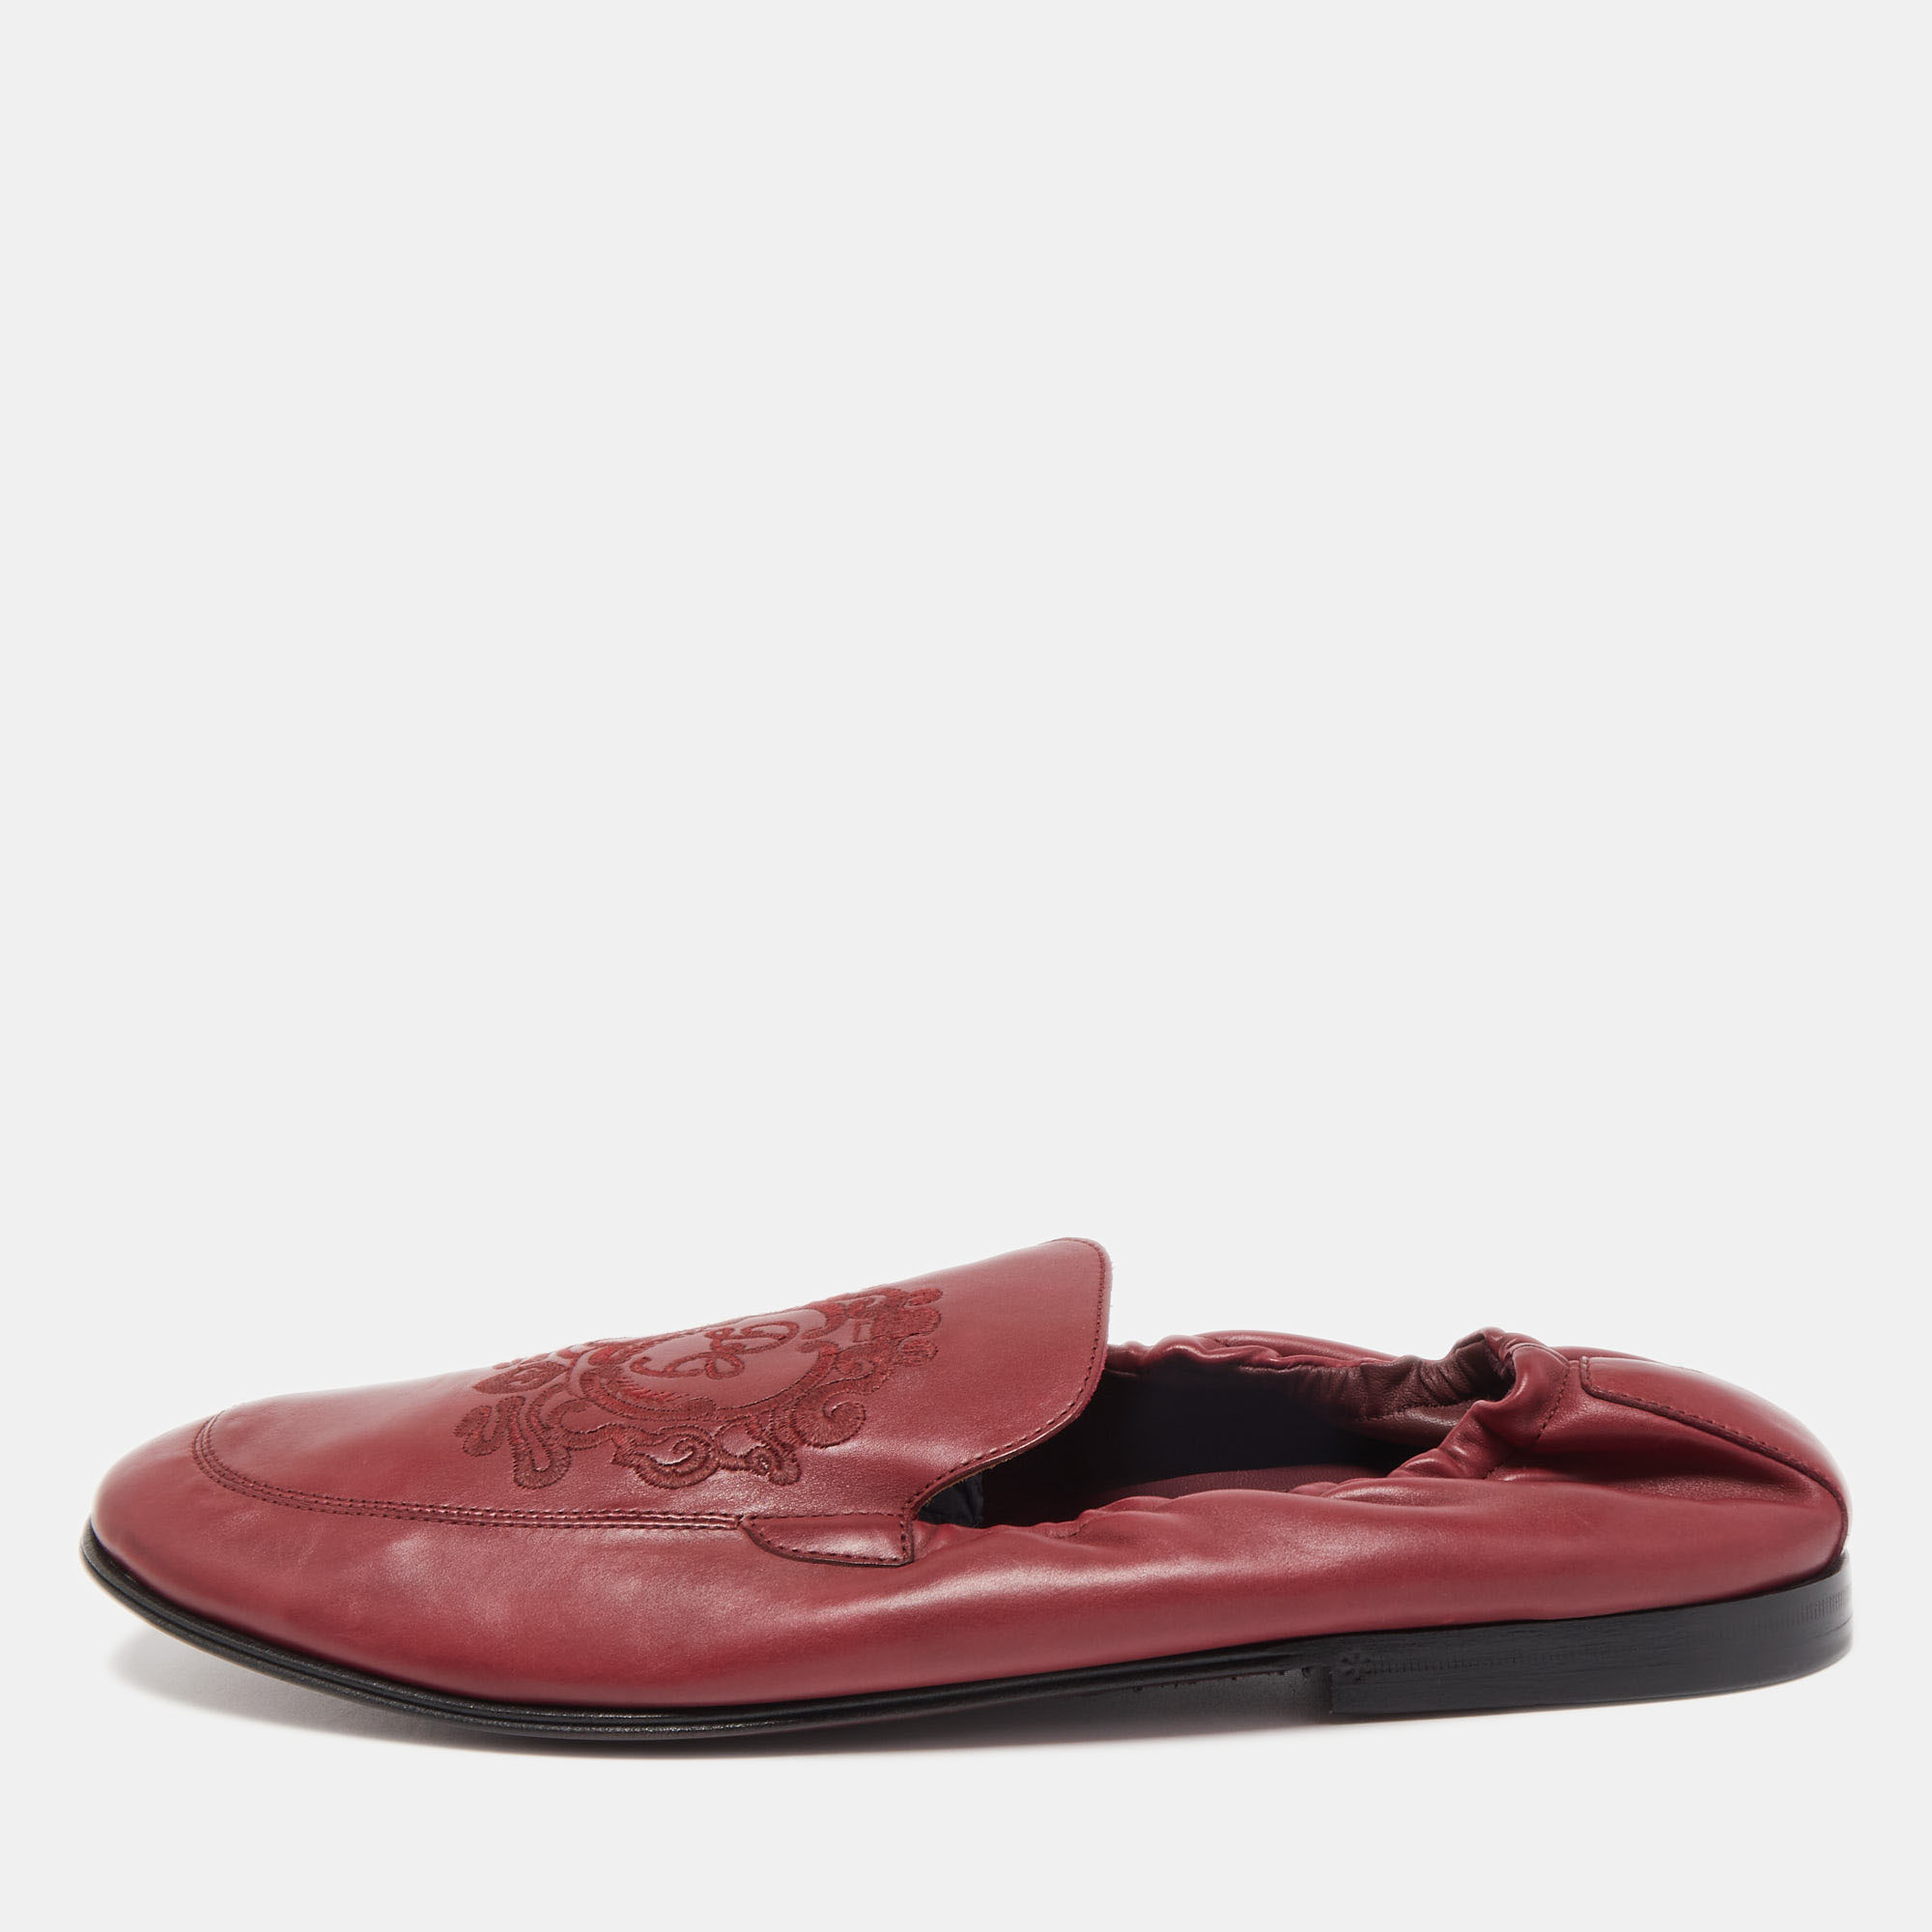 

Dolce & Gabbana Burgundy Embroidered Leather Scrunch Smoking Slippers Size